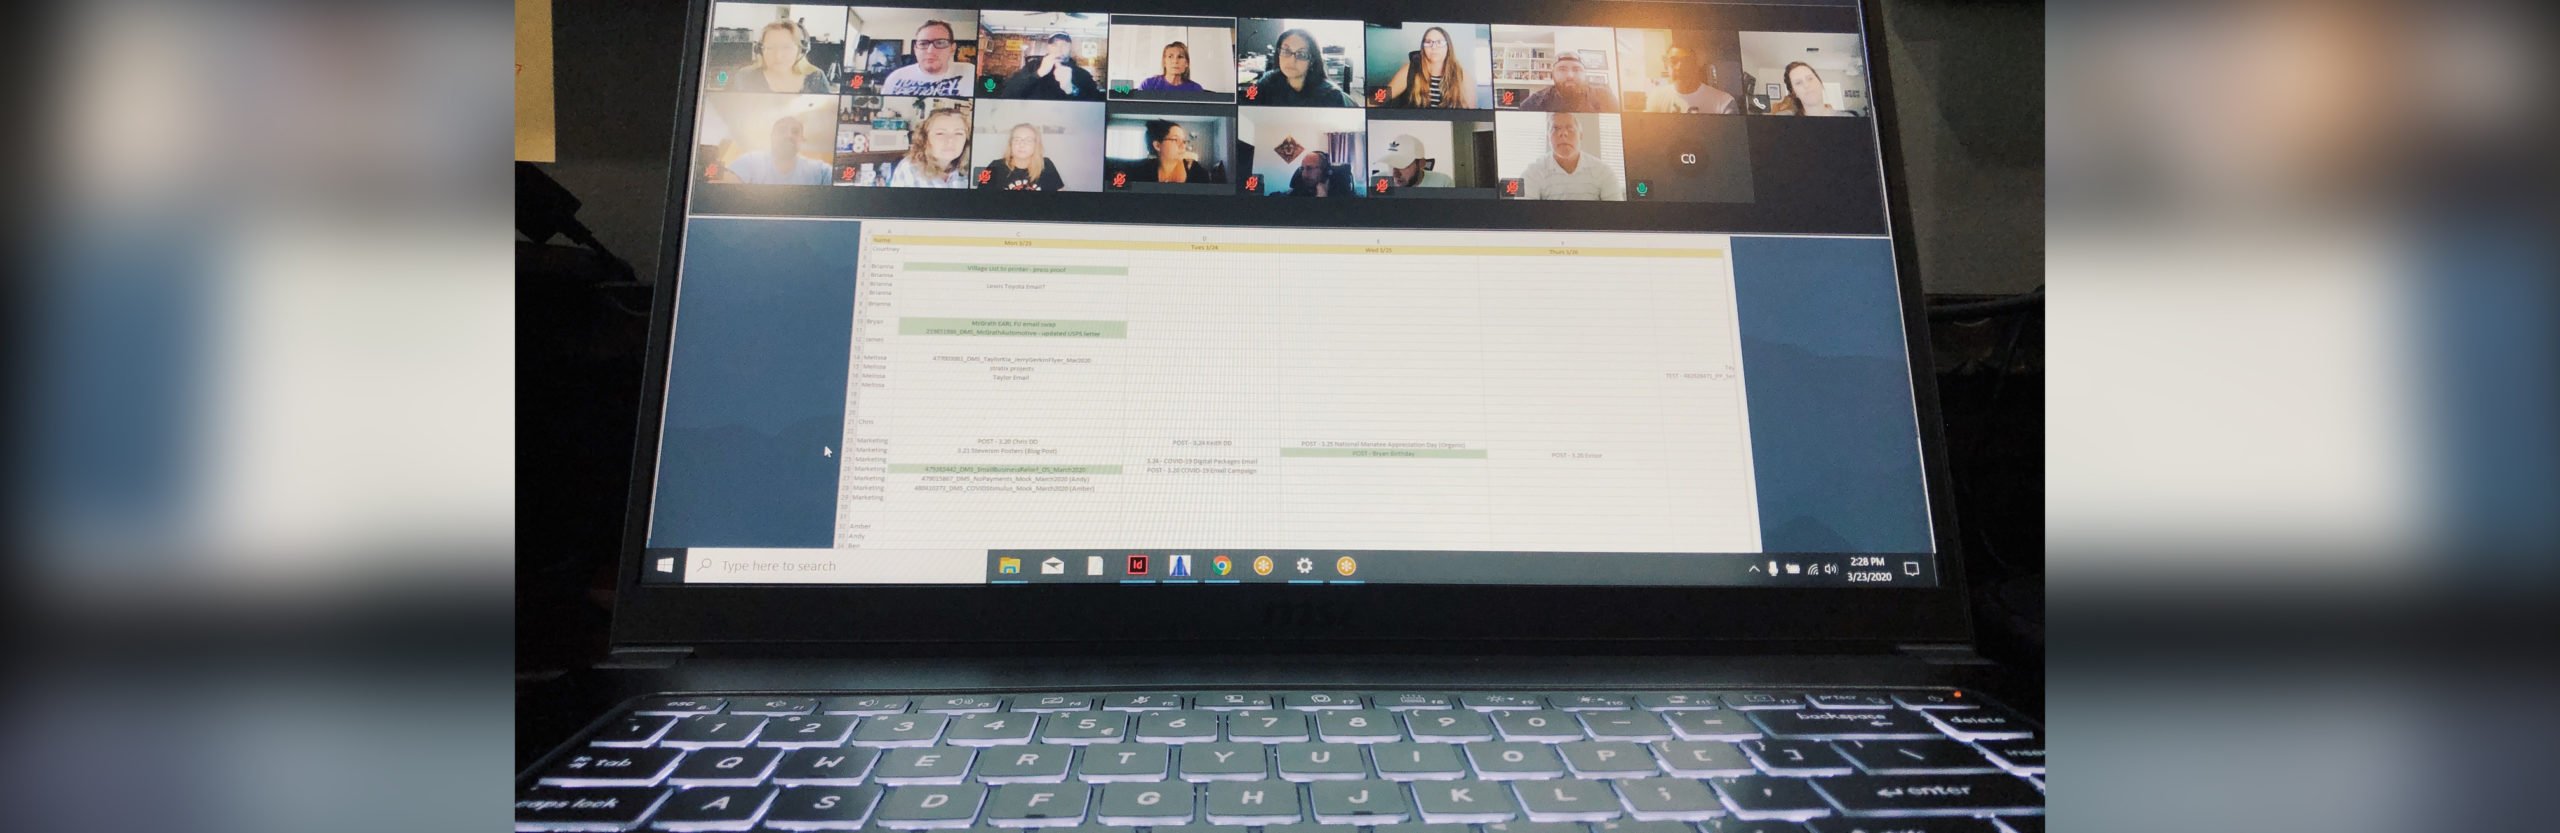 Photo of a laptop displaying a teleconference meeting between Diamond Media Solutions employees